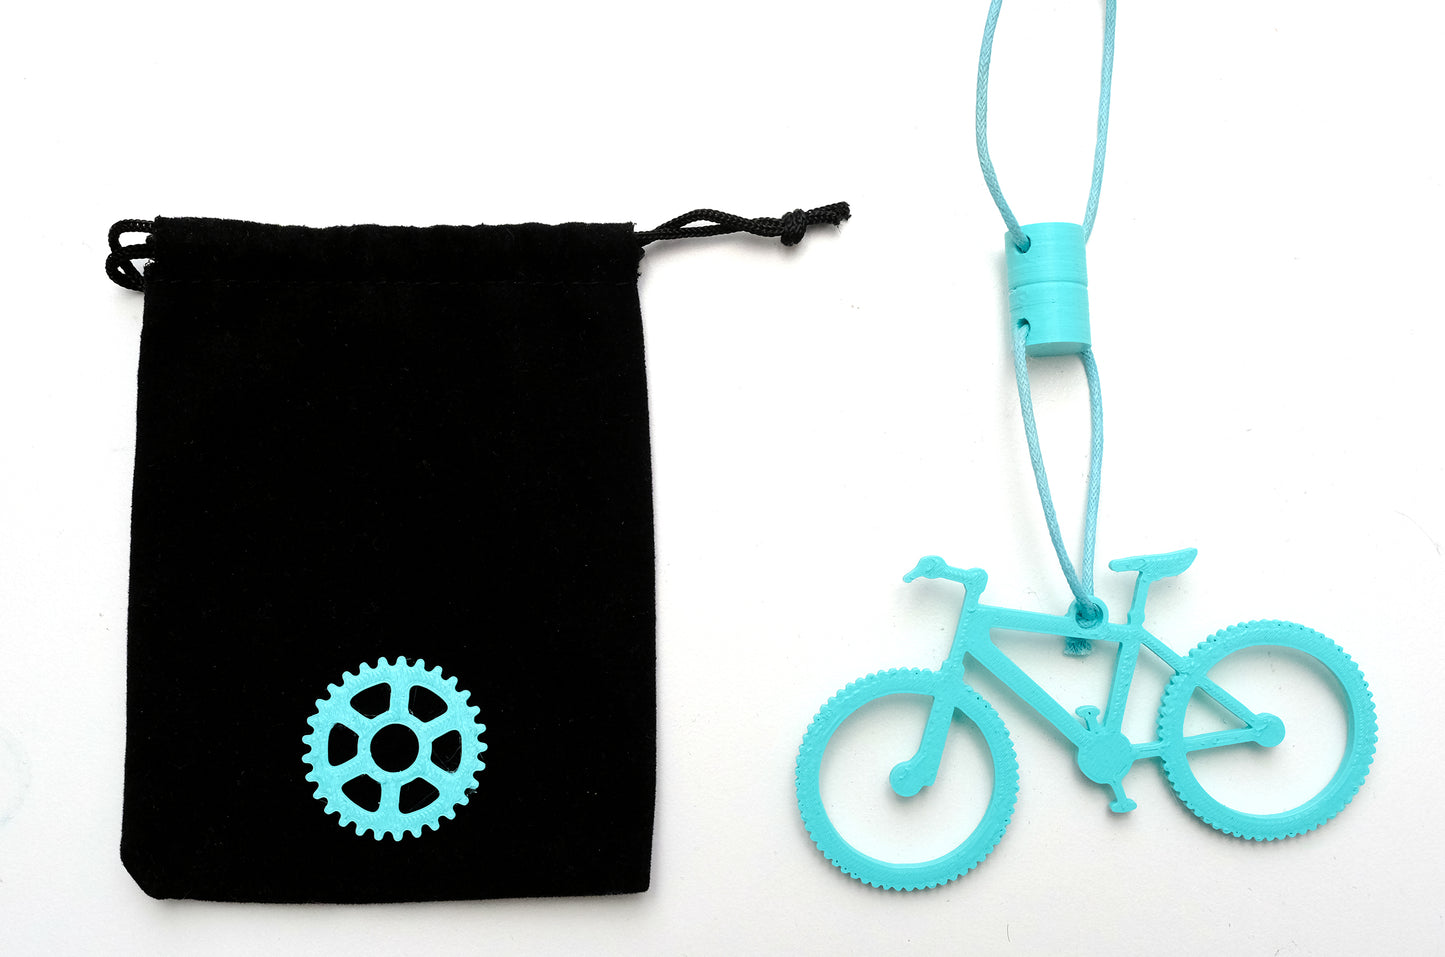 Bike on board reminder pendant for car, customizable and magnetized.